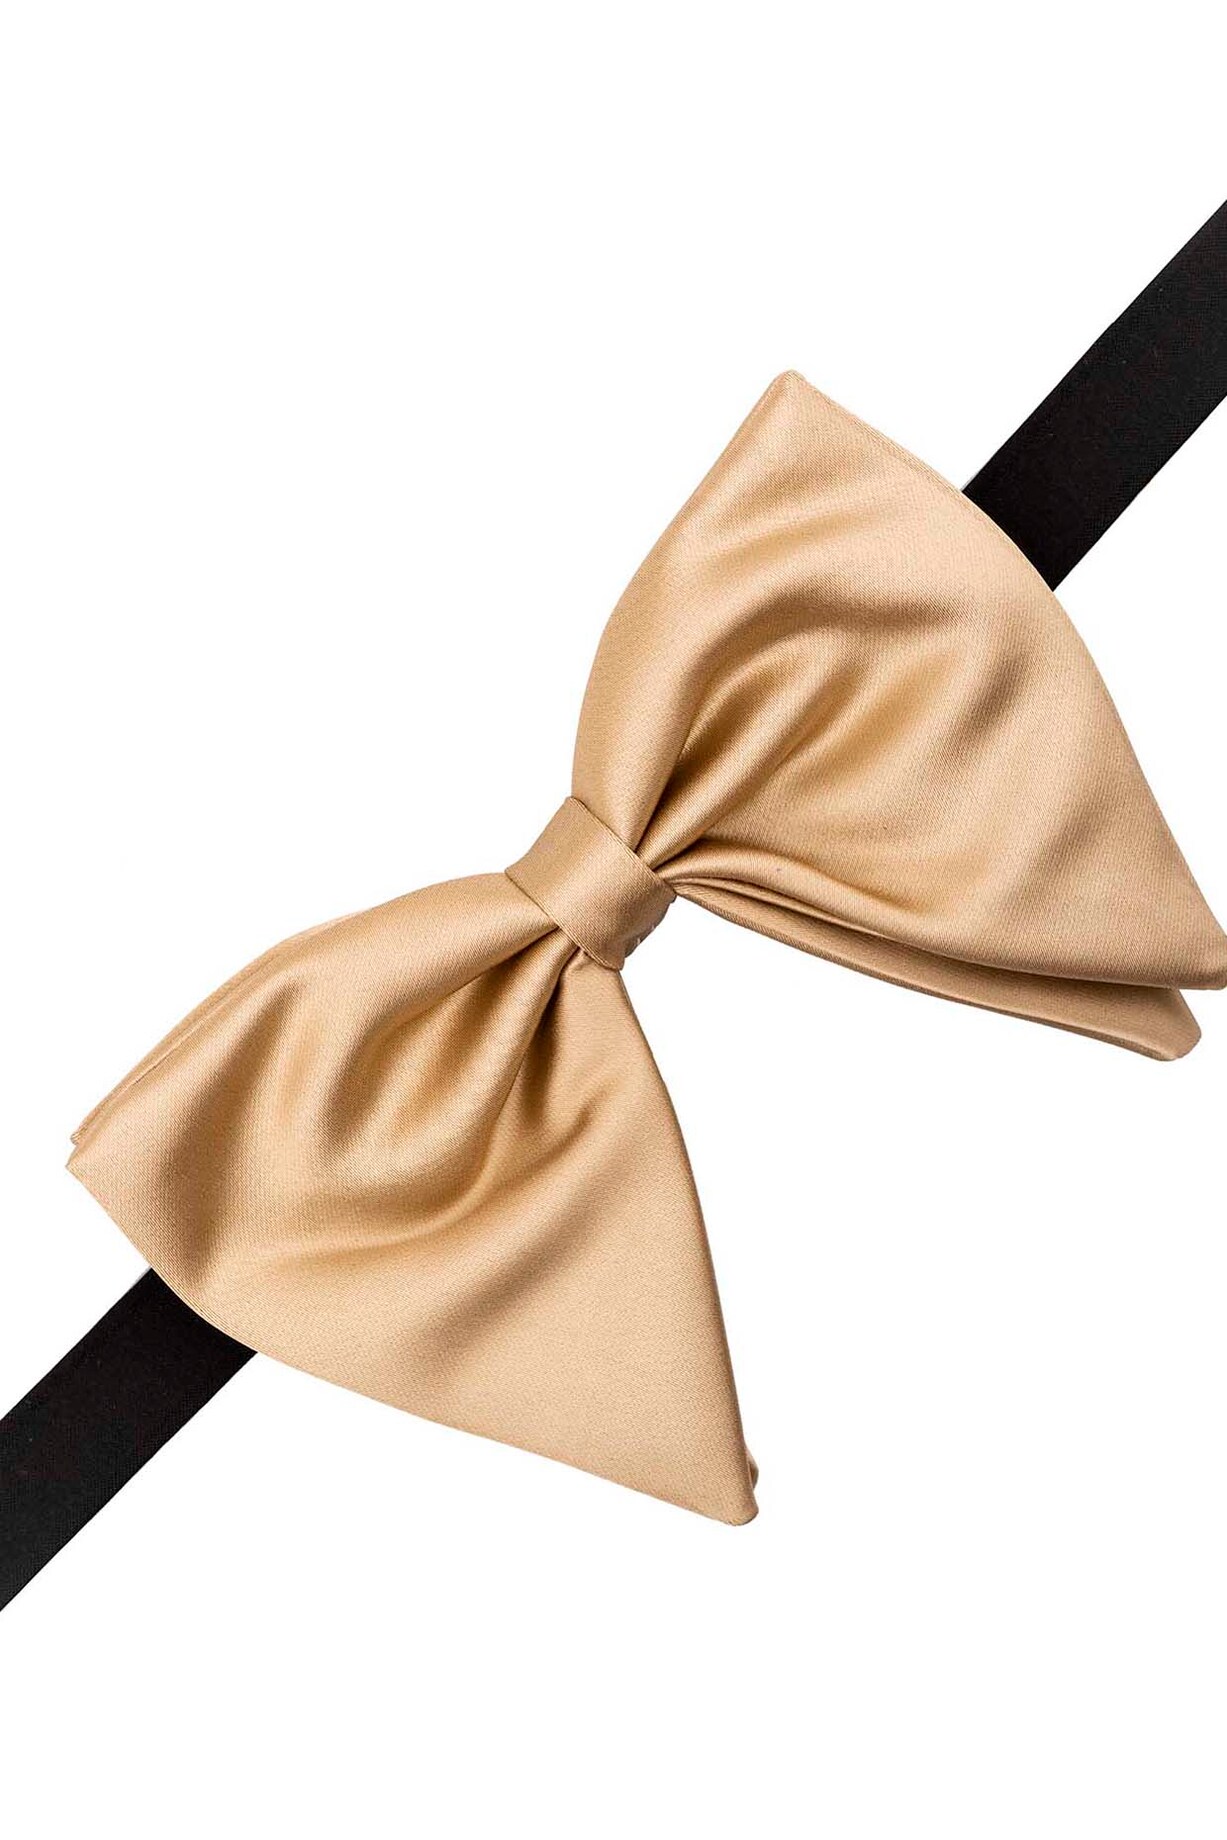 Gold Microfiber Bow Tie by THE TIE HUB